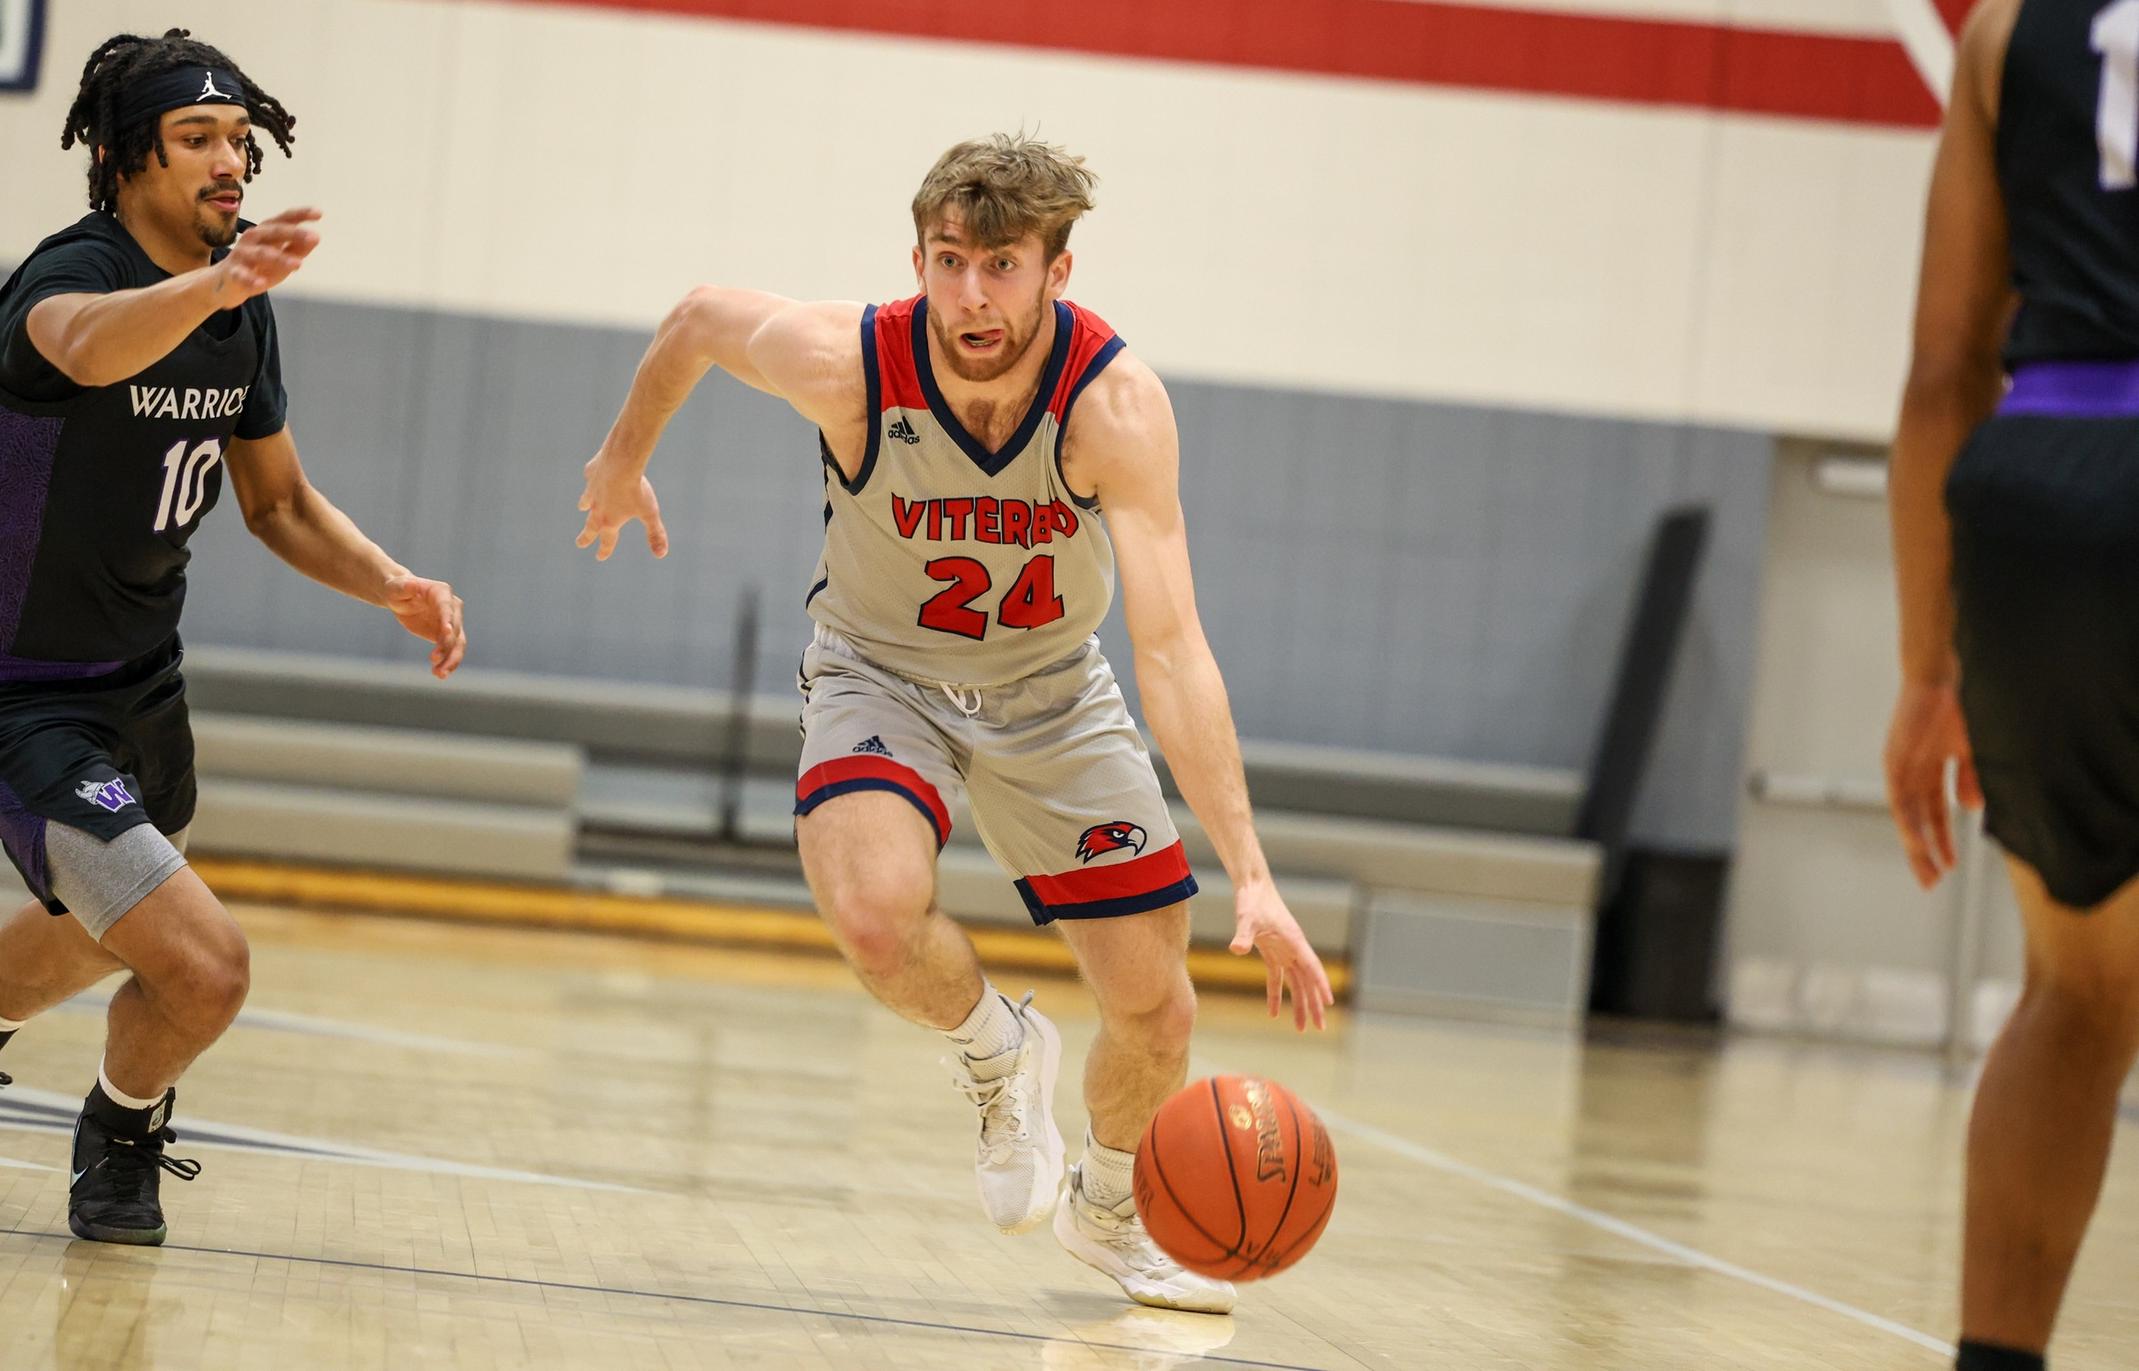 Olson and Crubel Score 21, But V-Hawks Fall to Comets